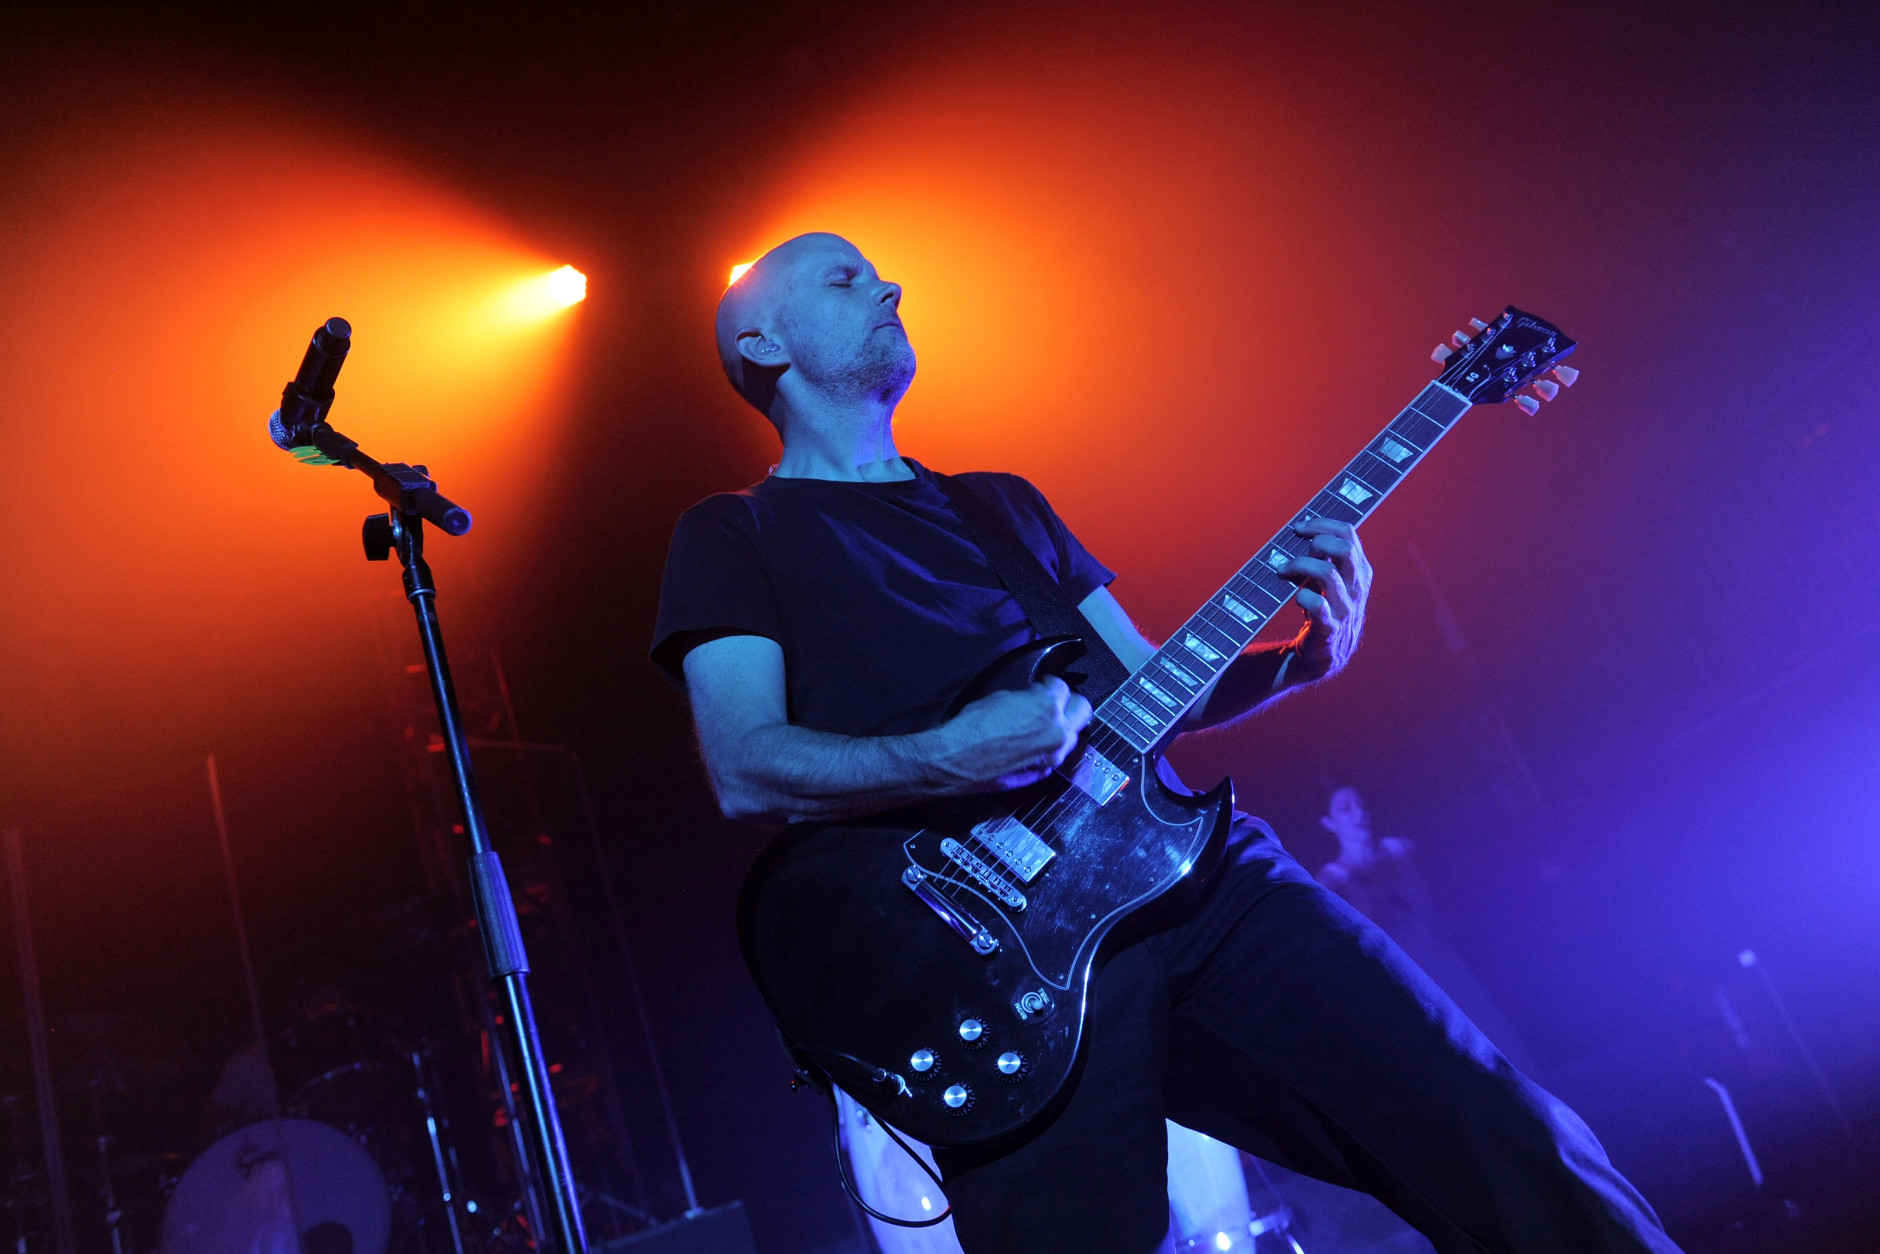 Moby performs at The Fonda Theatre on Thursday, Oct. 3, 2013 in Los Angeles. (Photo by Chris Pizzello/Invision/AP)